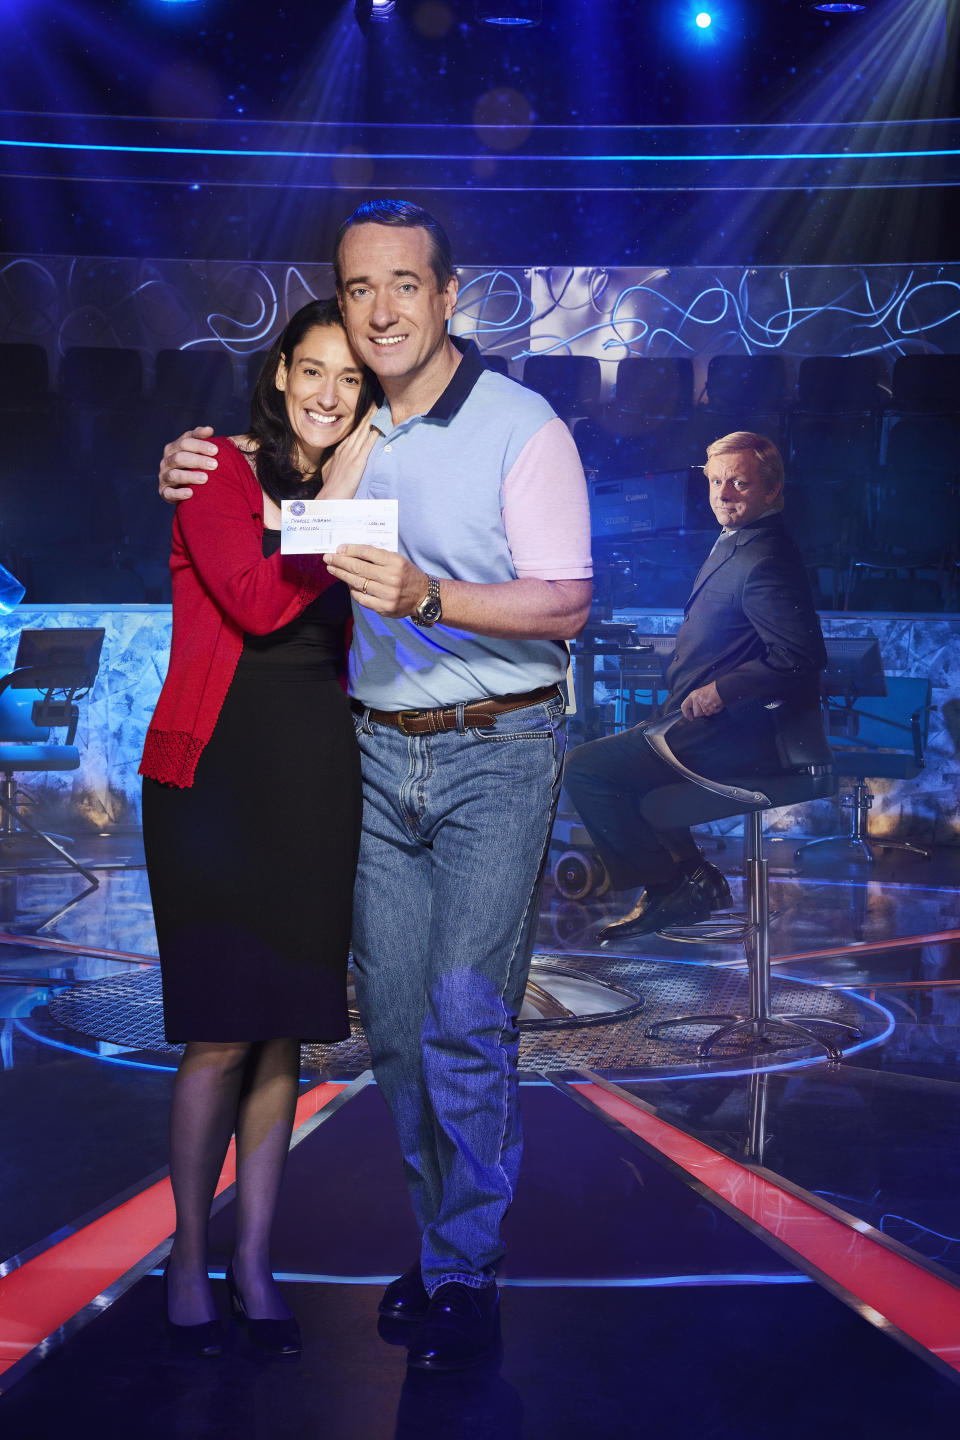 The Who Wants to Be a Millionaire? drama airs on ITV on Monday. (Leftbank pictures/ITV)